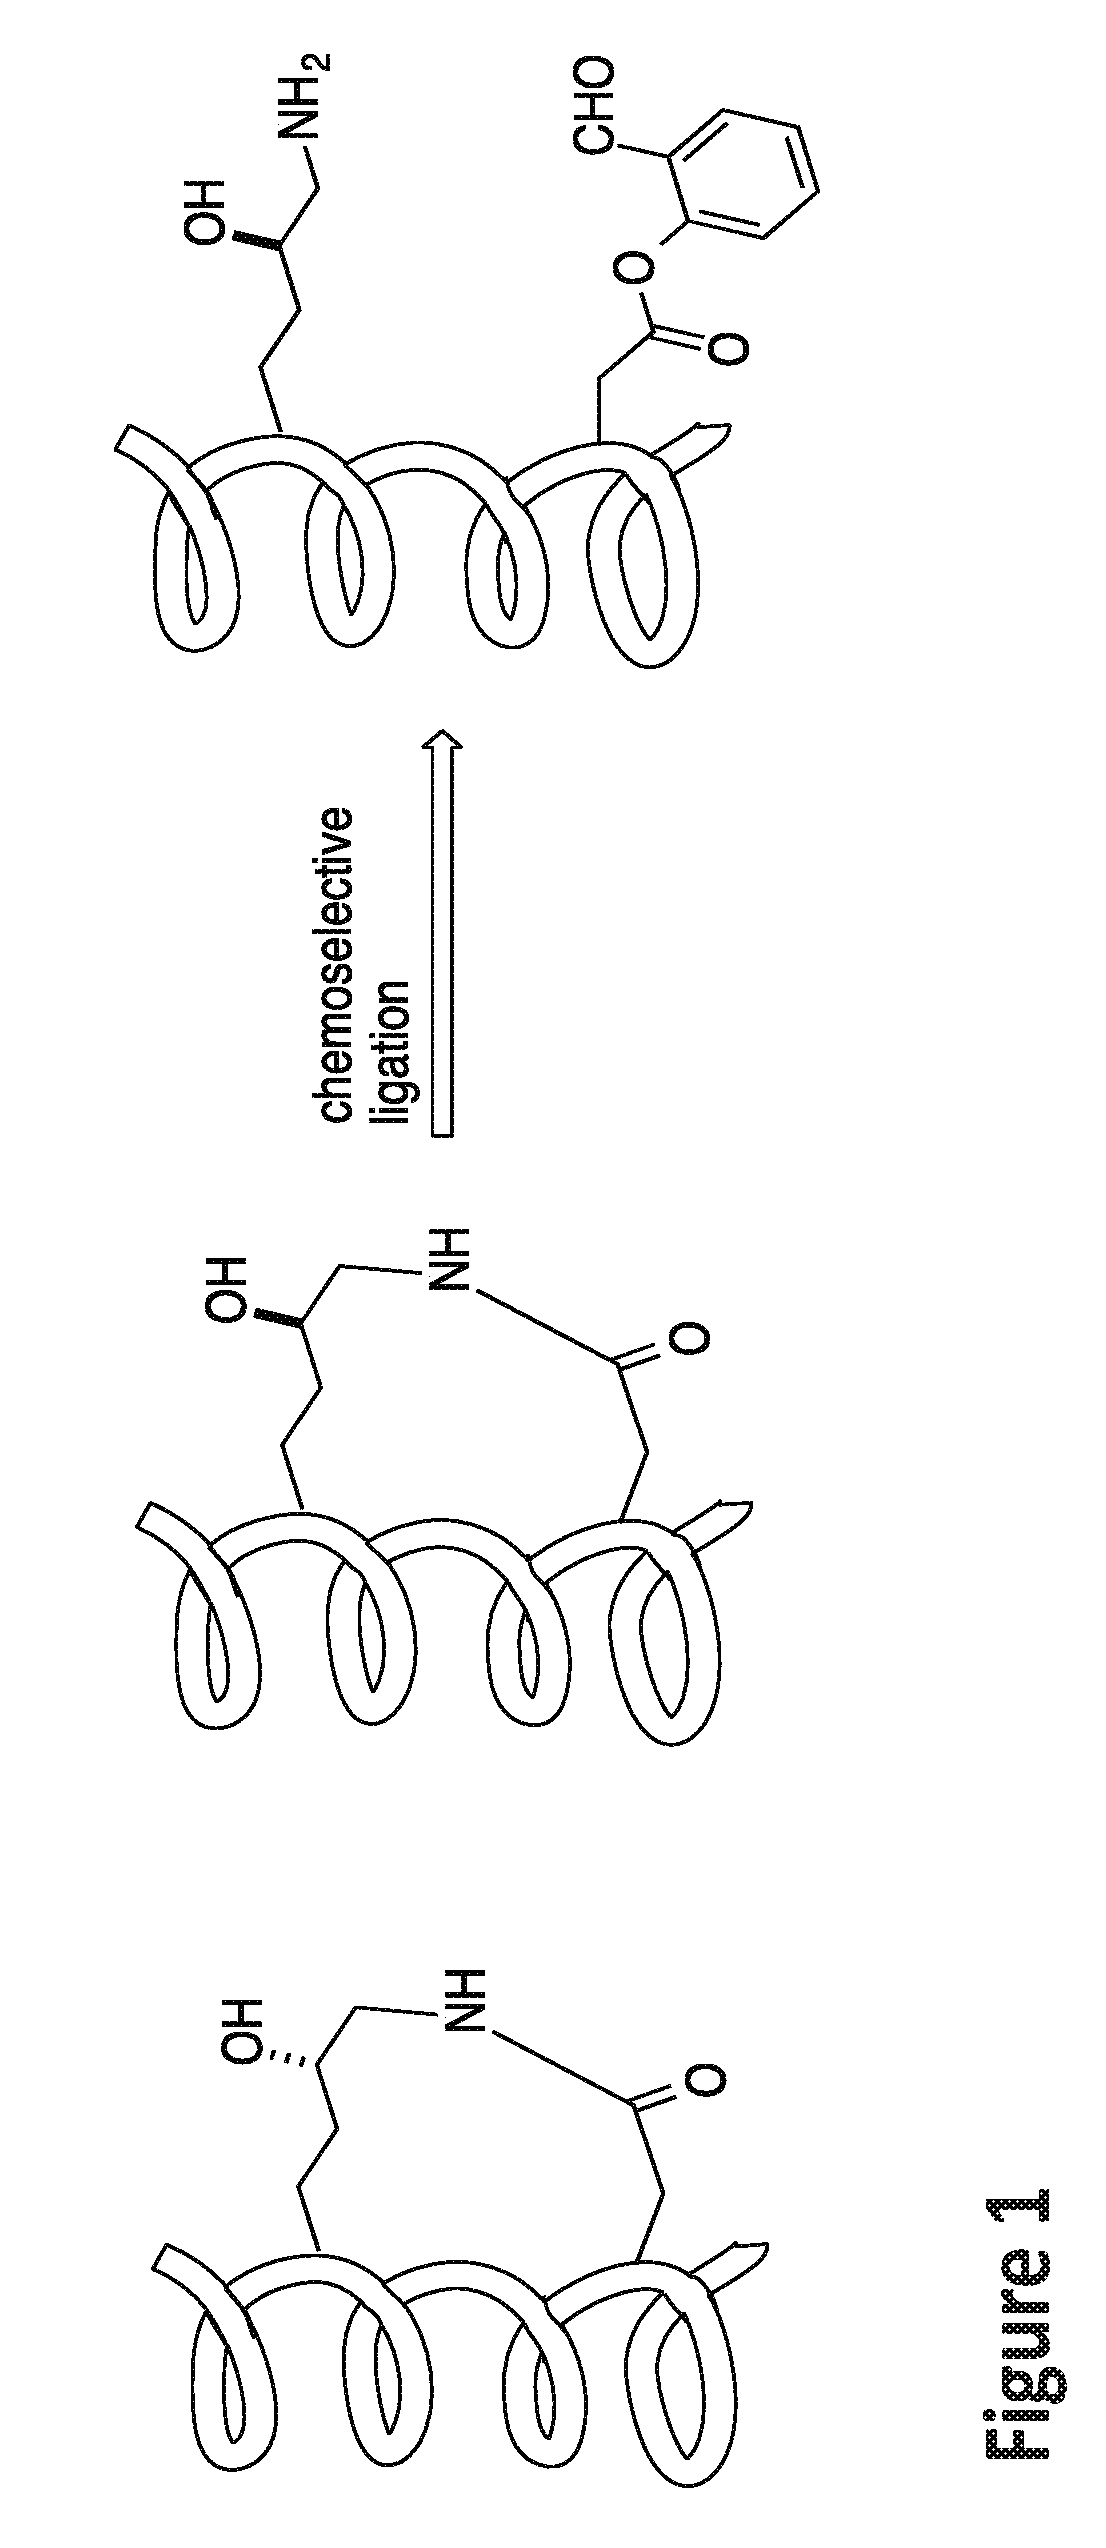 Stapled helical peptides and methods of synthesis